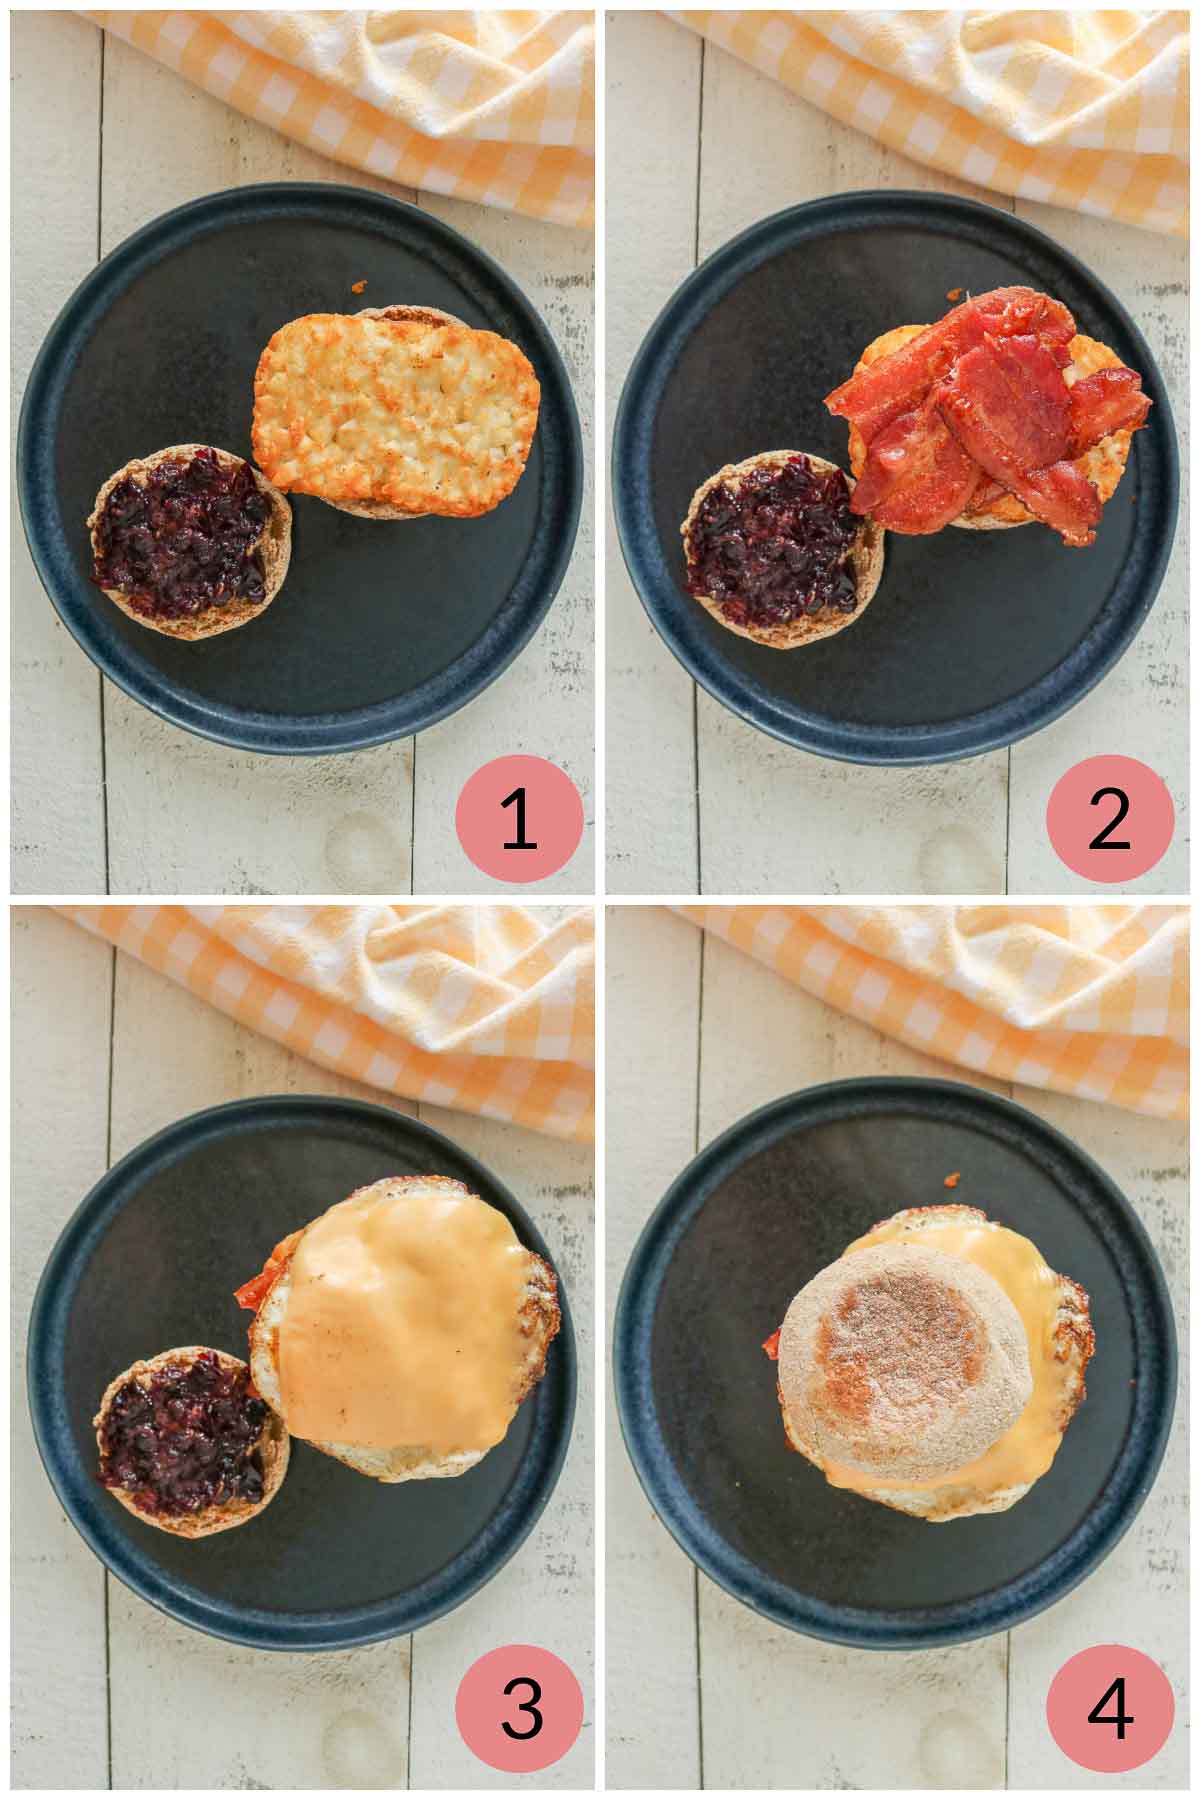 Steps to assemble a breakfast sandwich with a cheesy egg, hash brown patty and bacon.